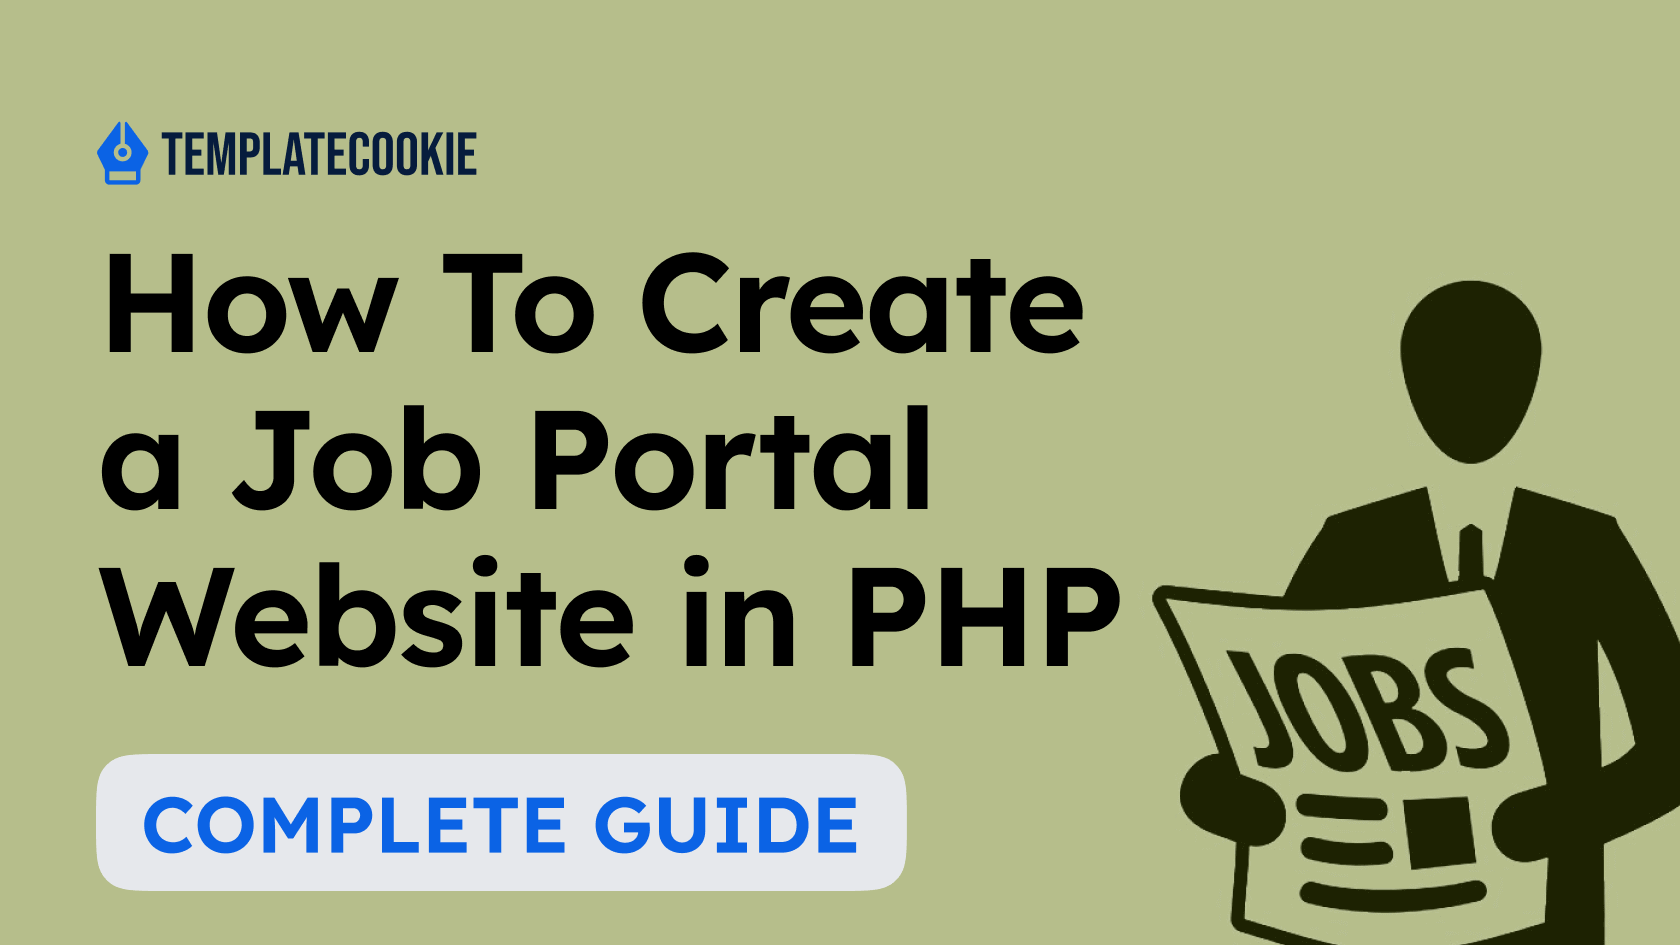 How To Create a Job Portal Website in PHP - A Complete Guide